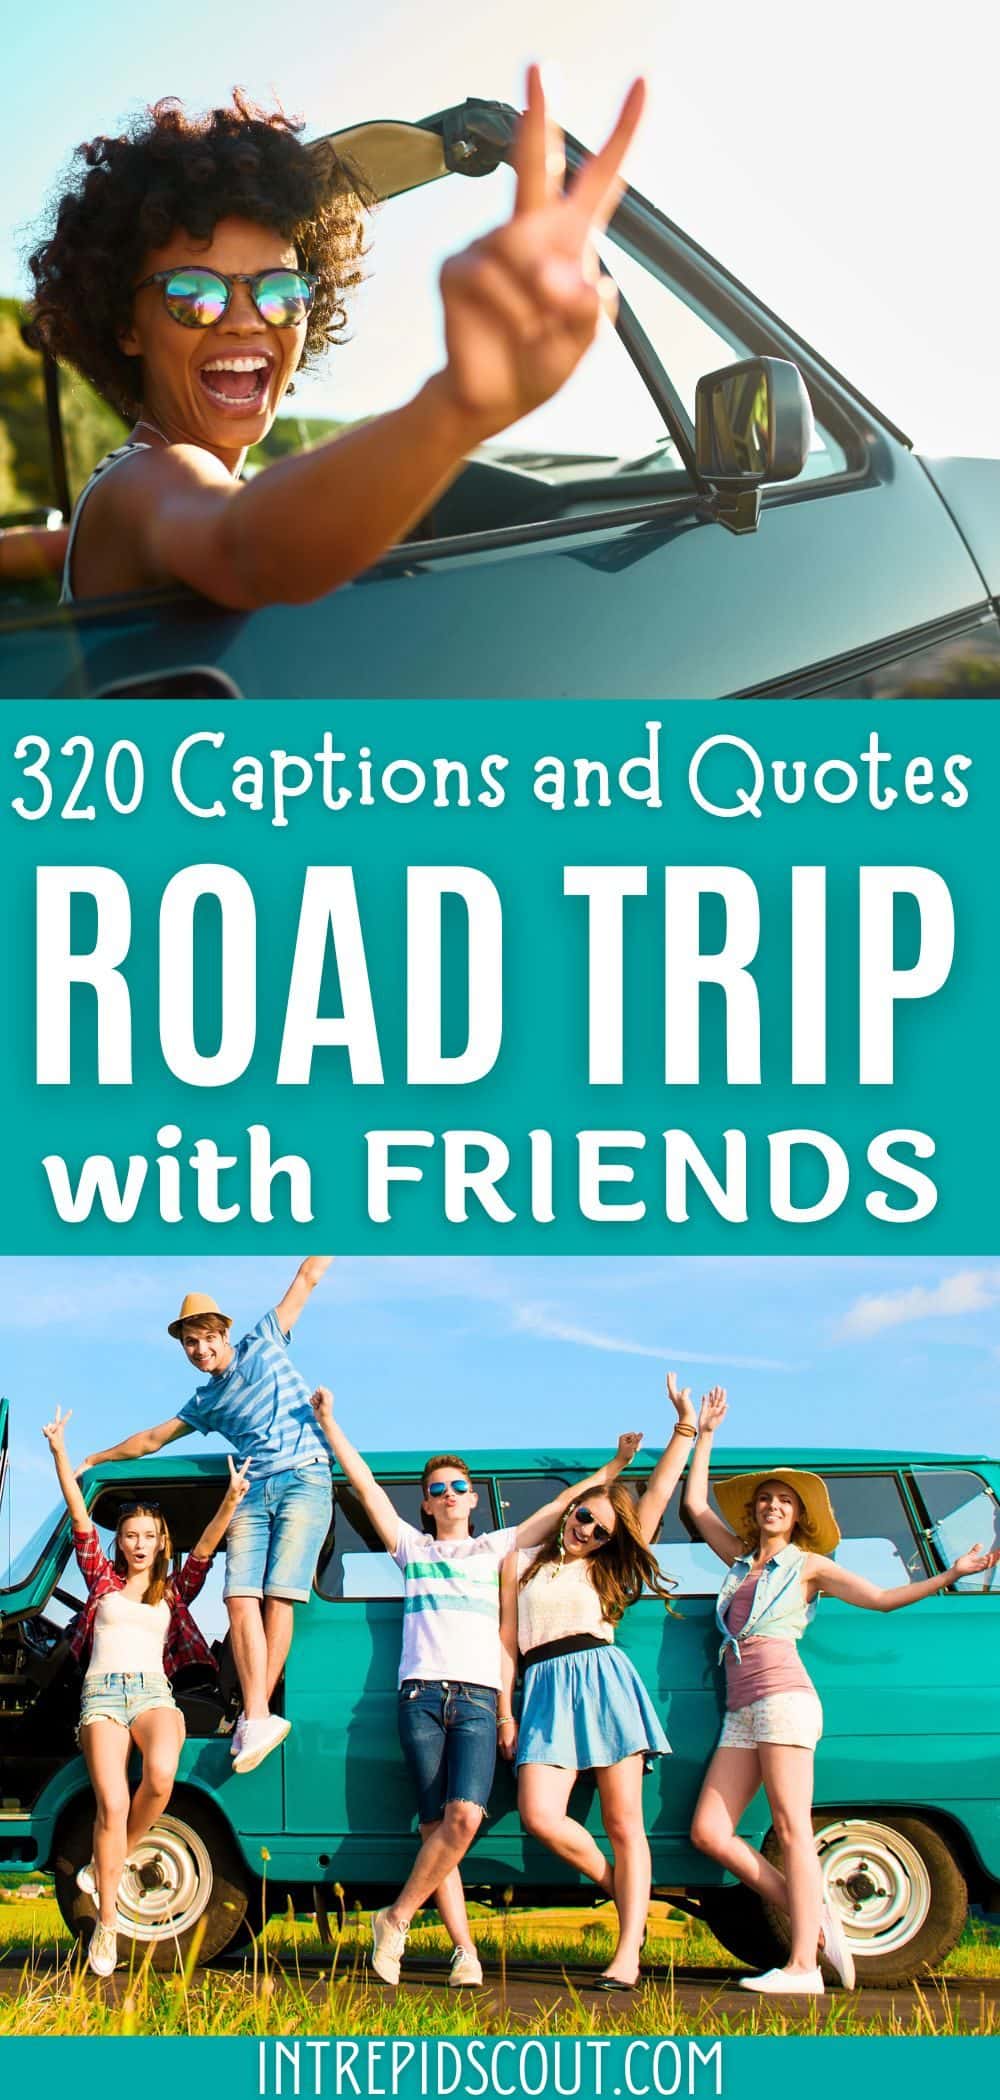 Road Trip with Friends Captions and Quotes